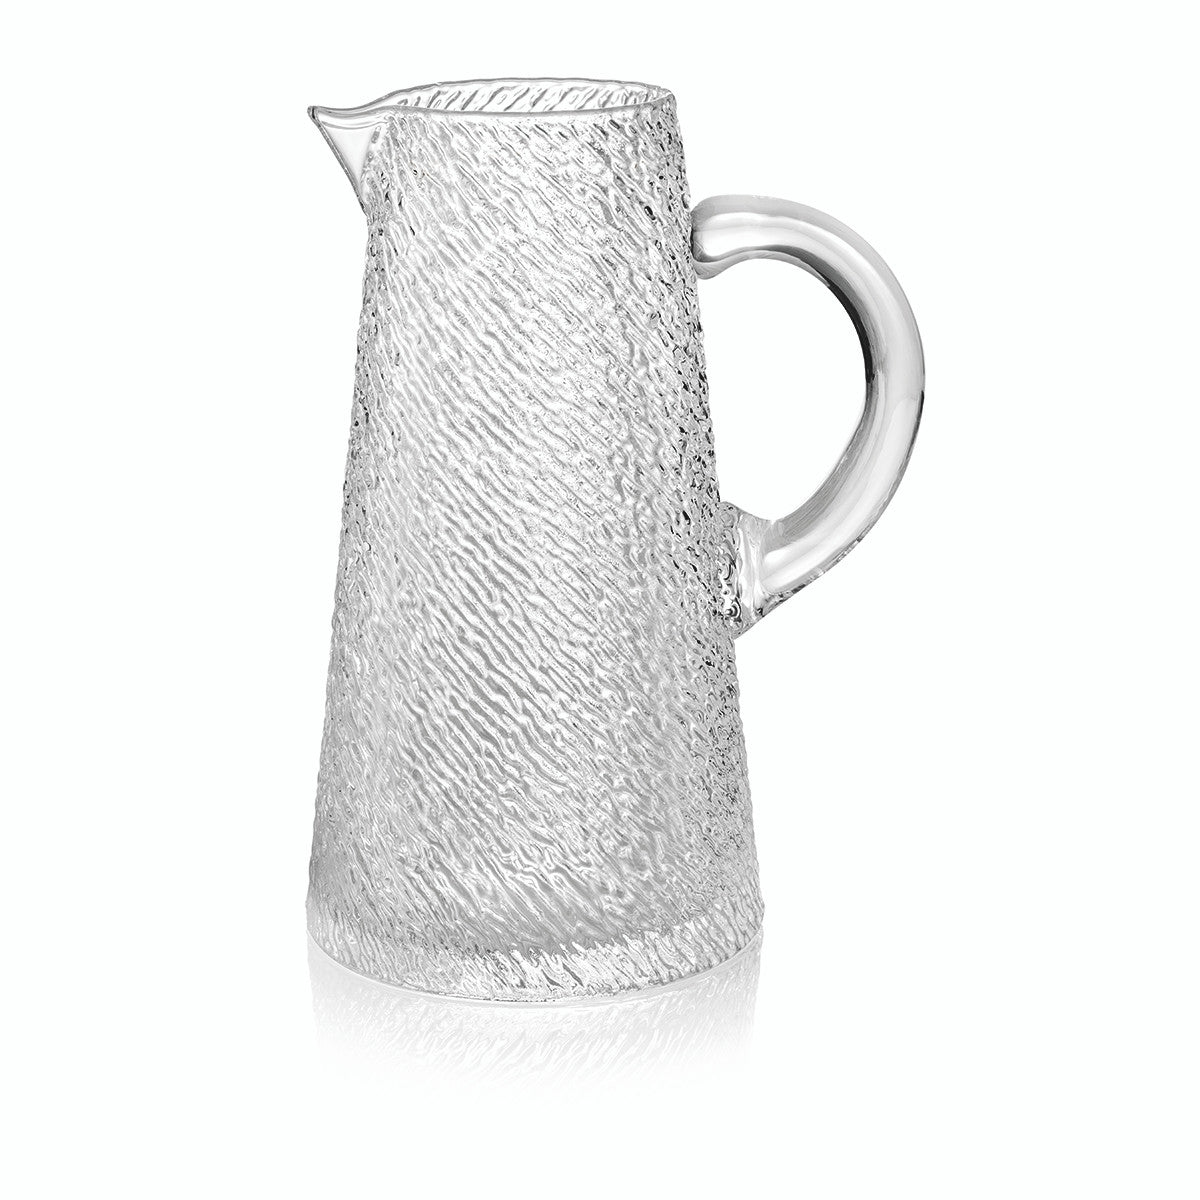 IVV Iroko Pitcher Clear